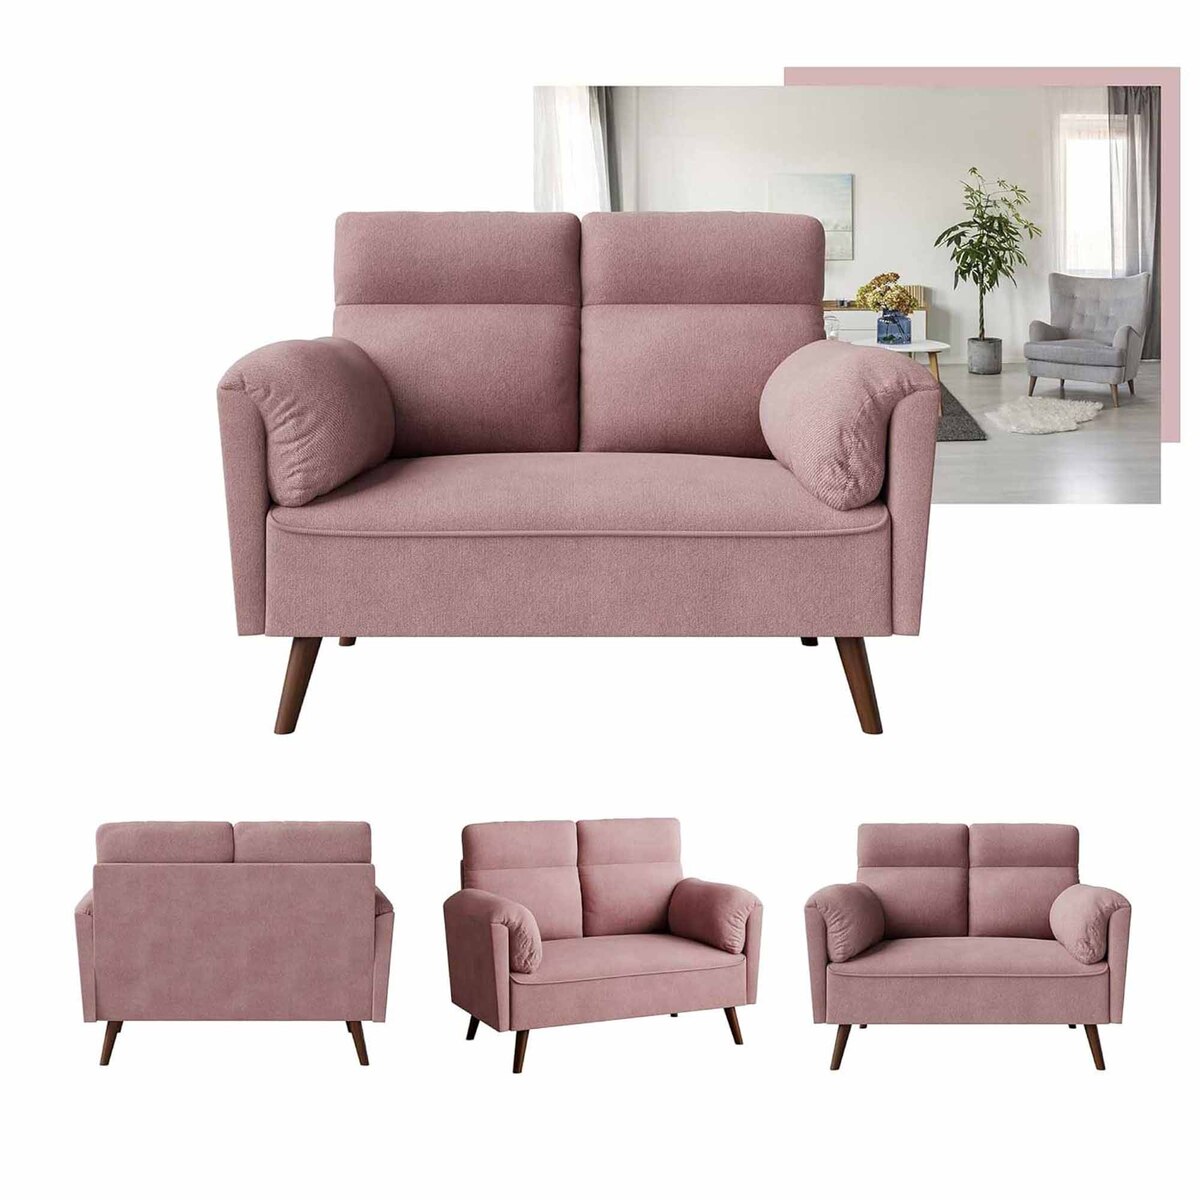 Royal Sapphire Pink, 2-Seater Fade Resistant Fabric Sofa - Loveseat Sofa Couch with soft armset, Comfy for living